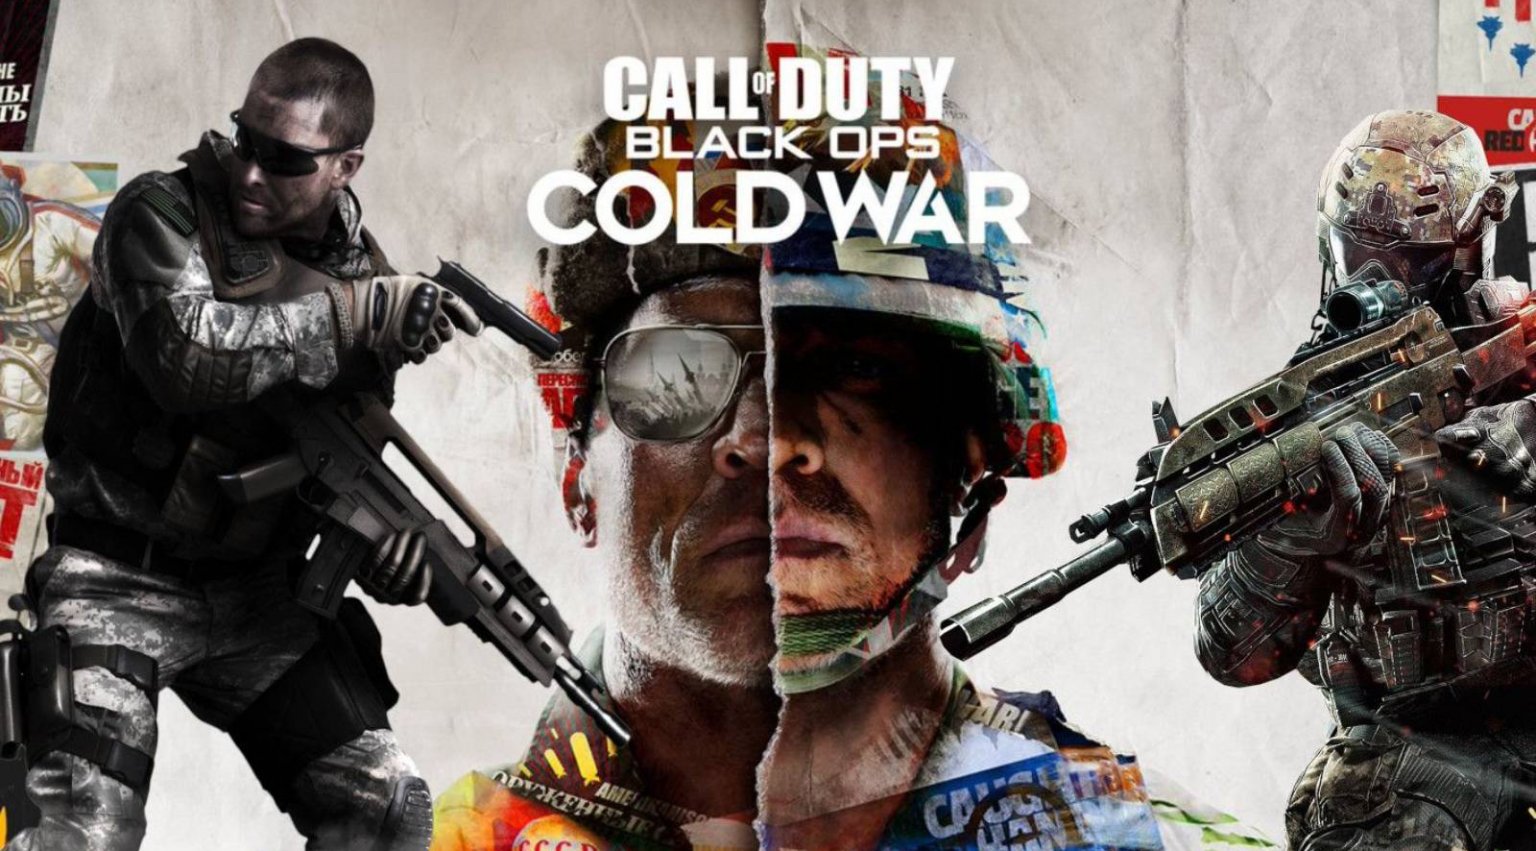 call of duty black ops cold war for pc